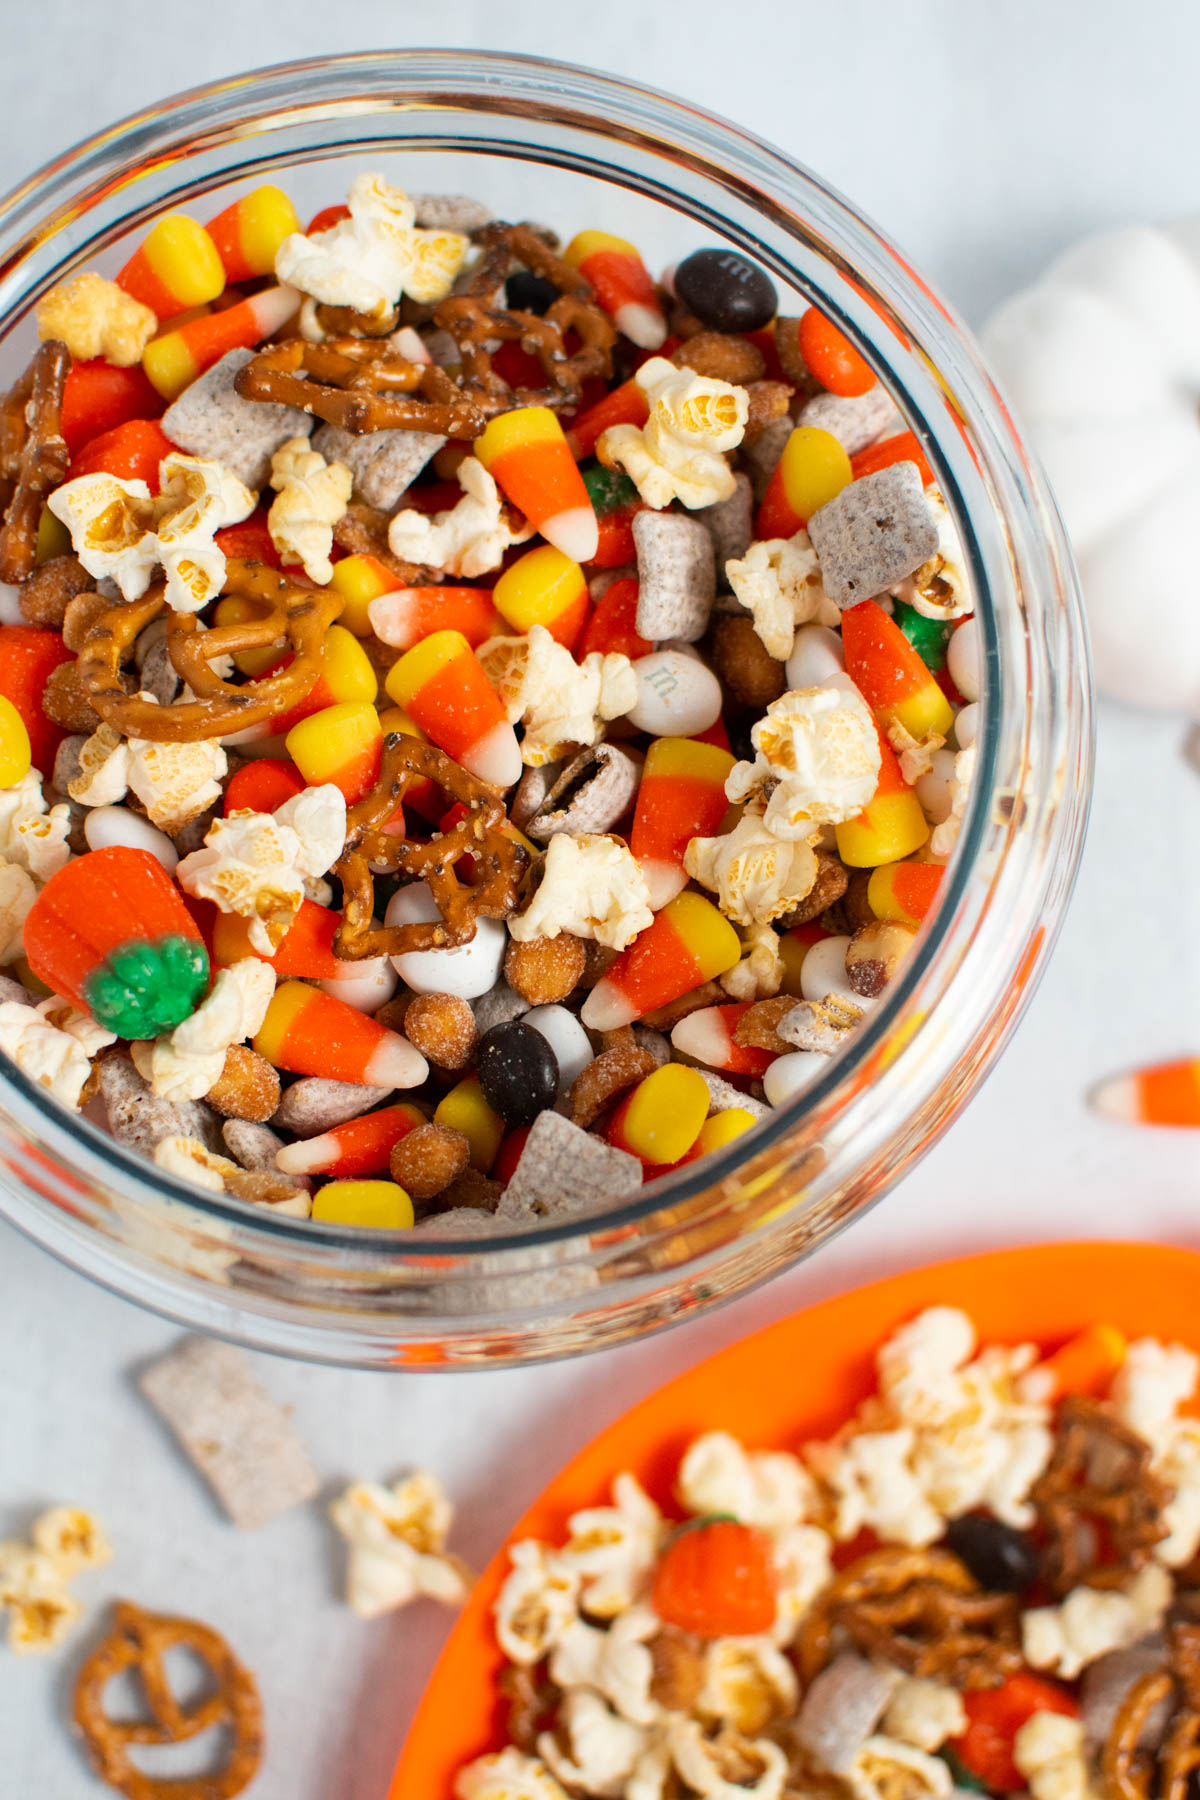 Overhead photo of Halloween popcorn mix with pretzels and candy in glass jar.